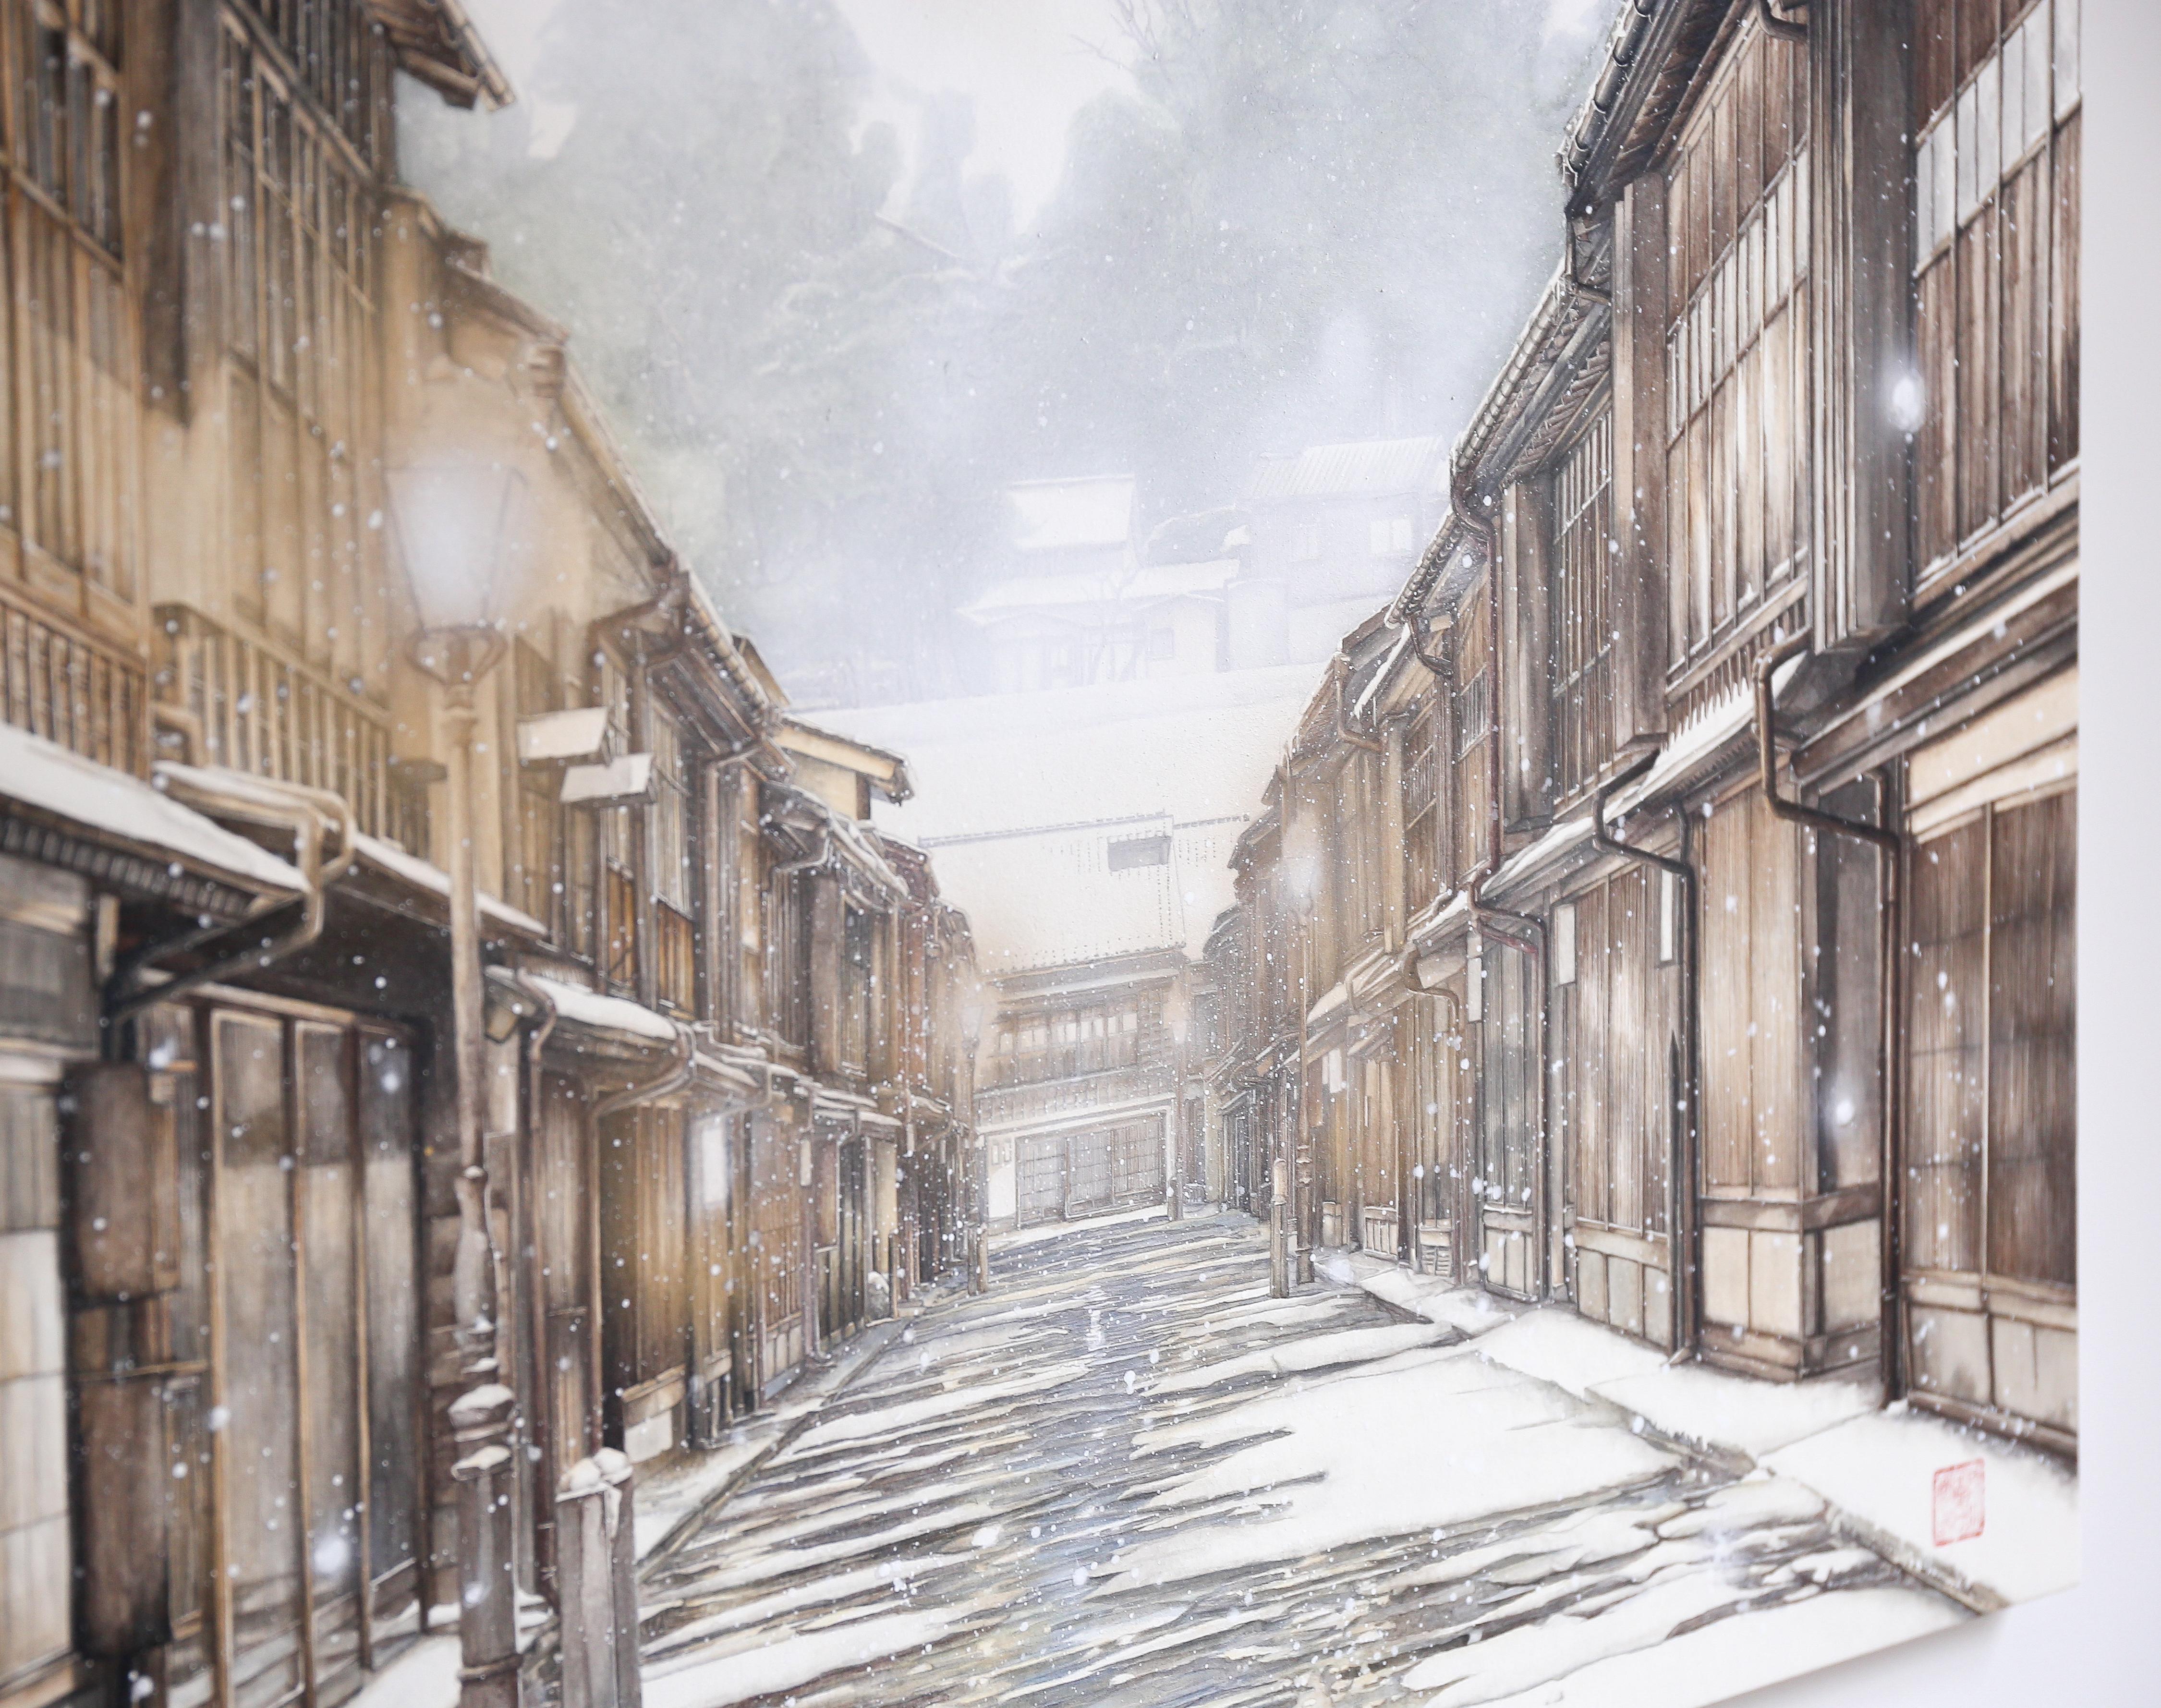 Kanazawa - Japanese Cityscape Painting in 24k Gold and Minerals, Realism, Winter For Sale 6